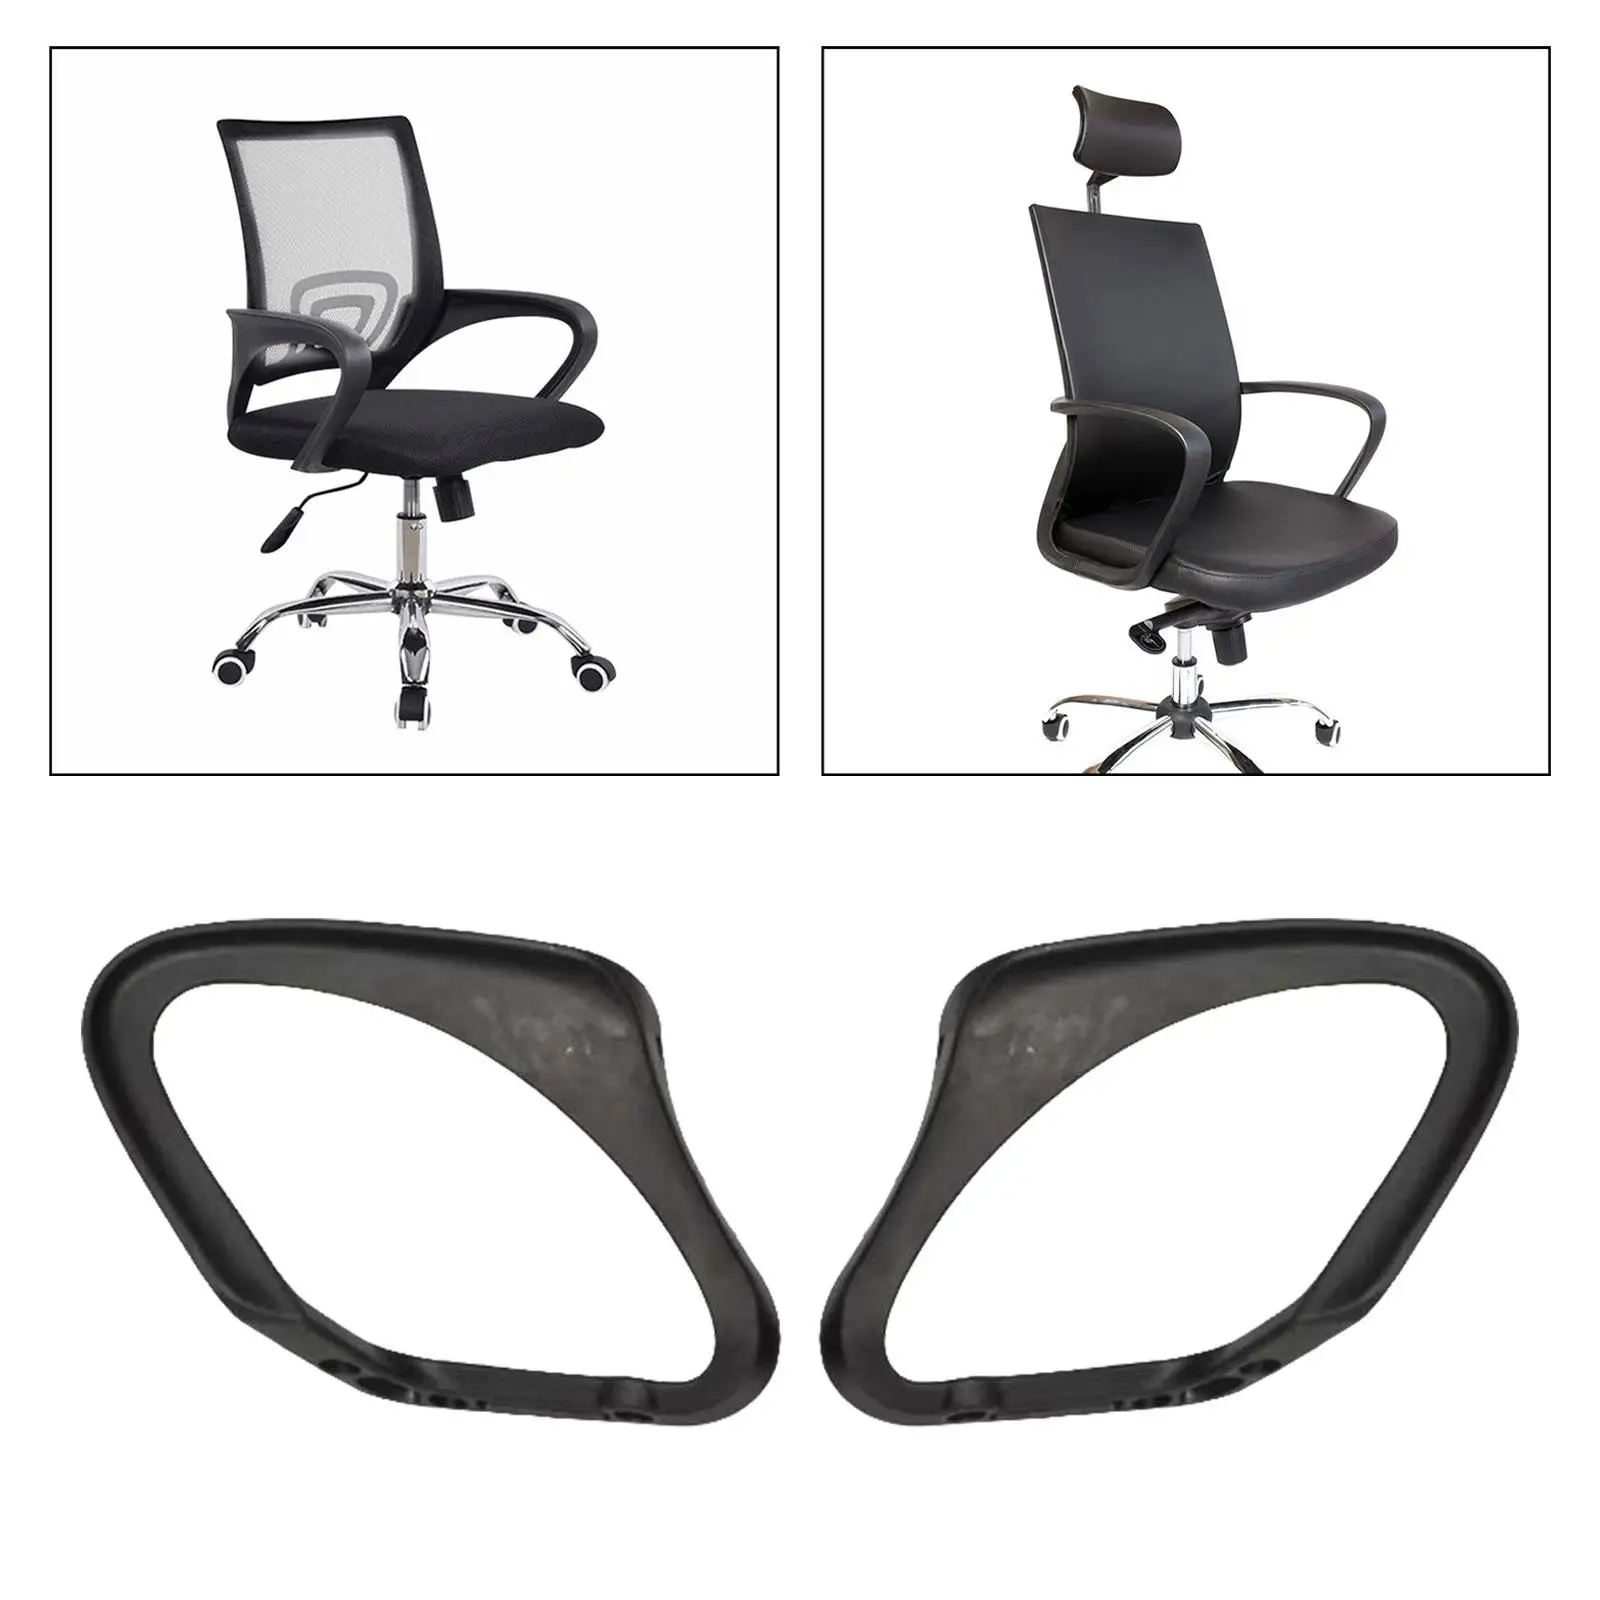 2 Pieces Chair Armrest Easy to Install Durable Accessory Desk Accessory for Bedroom Kids Room Home Outdoor Gaming Chair